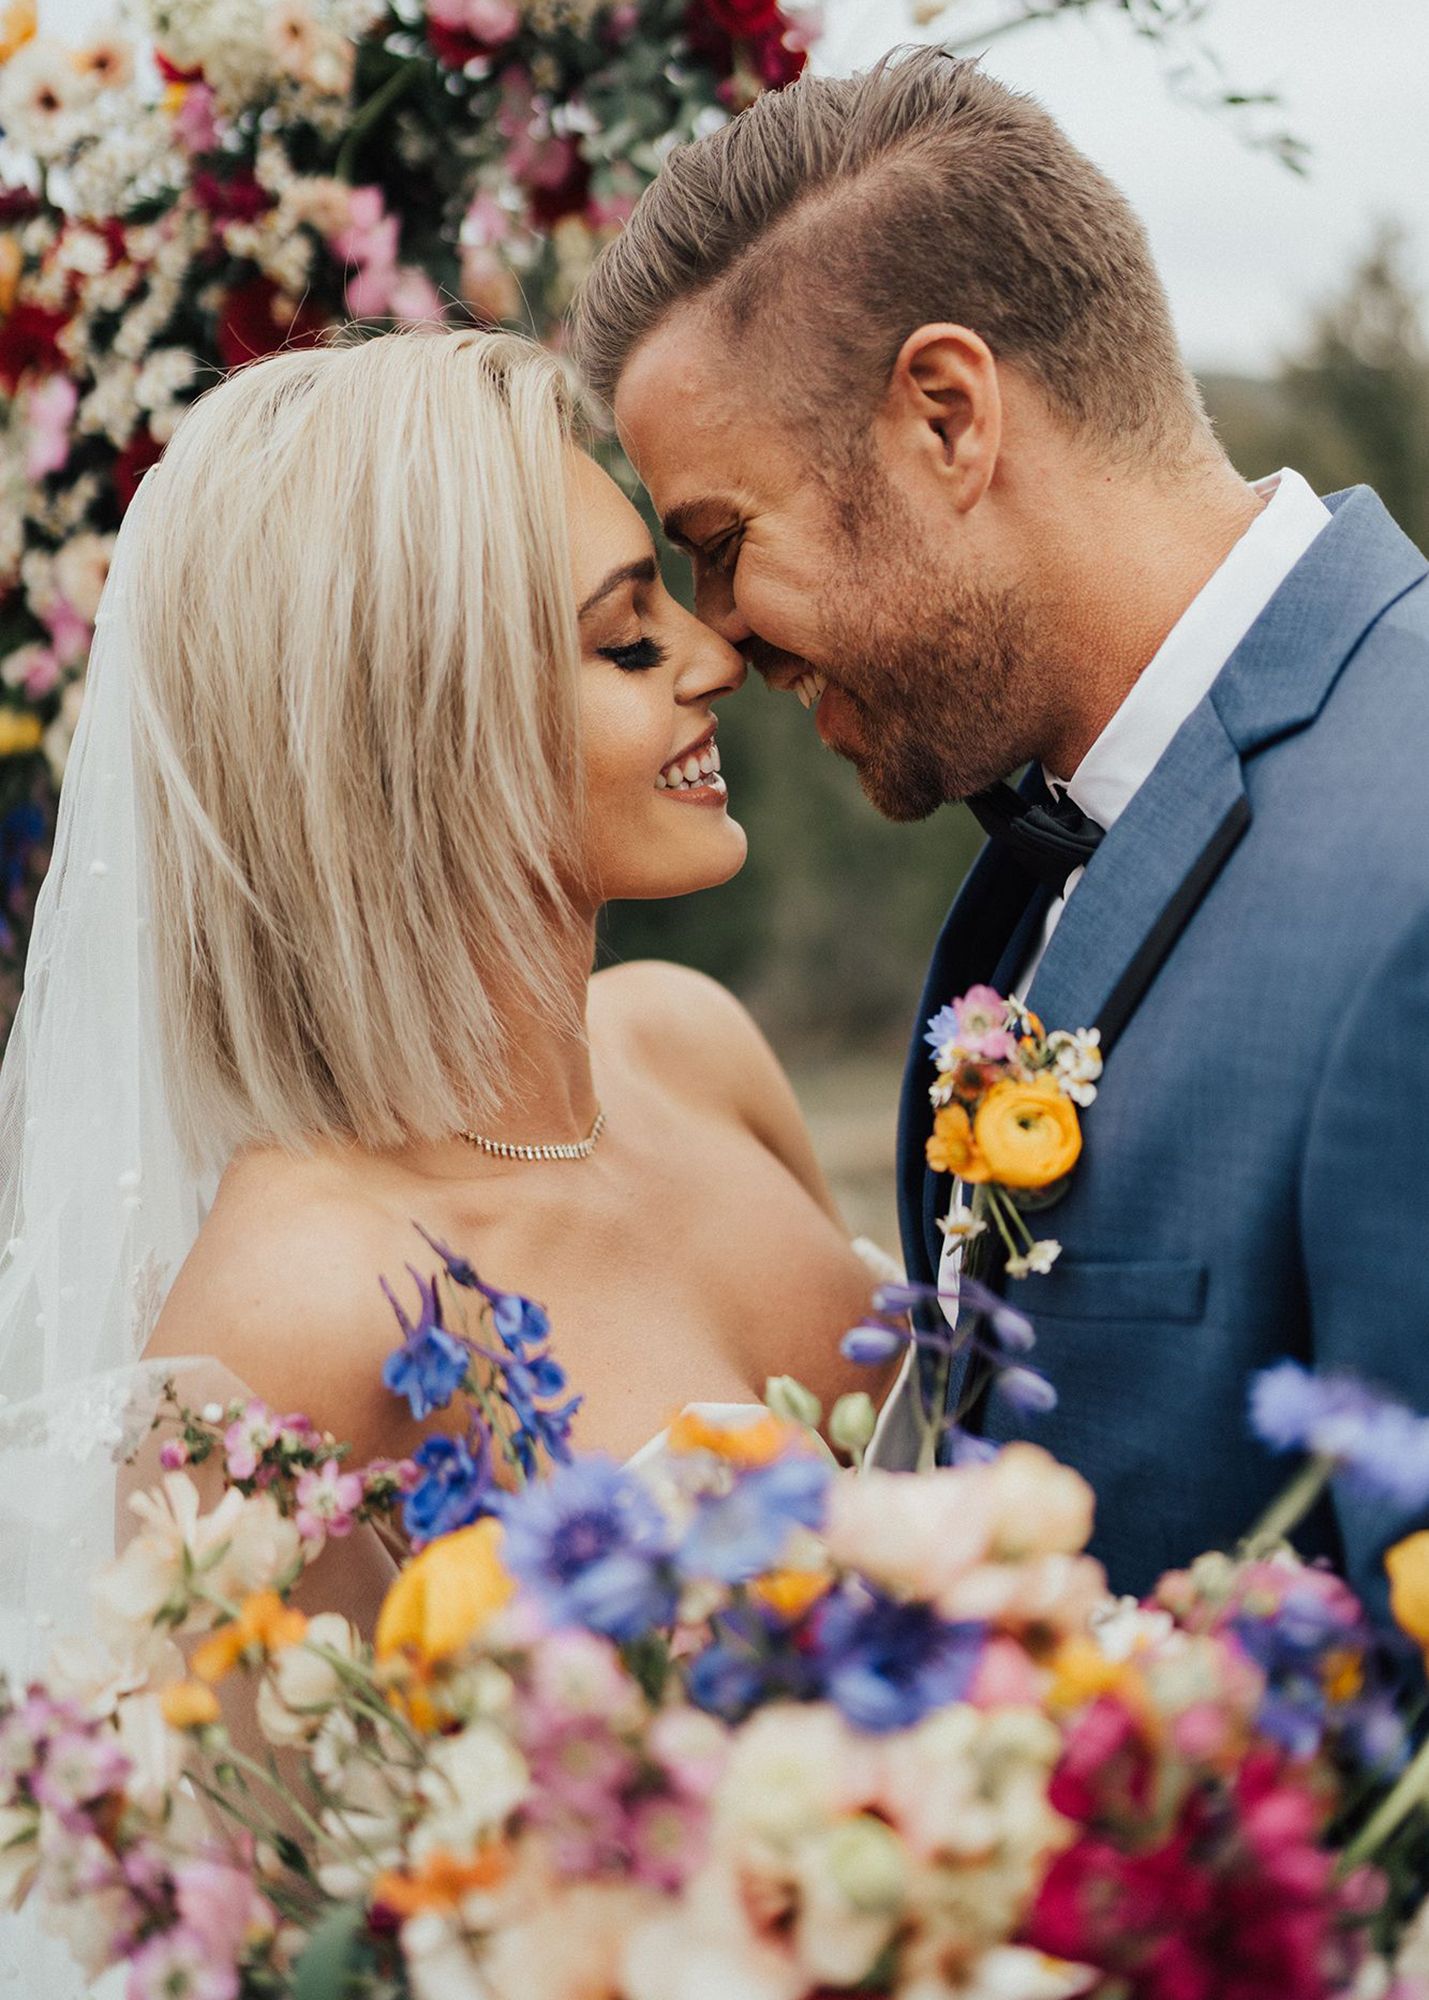 photo of a groom in a blue suit and bride during a wedding ceremony surrounded by flowers